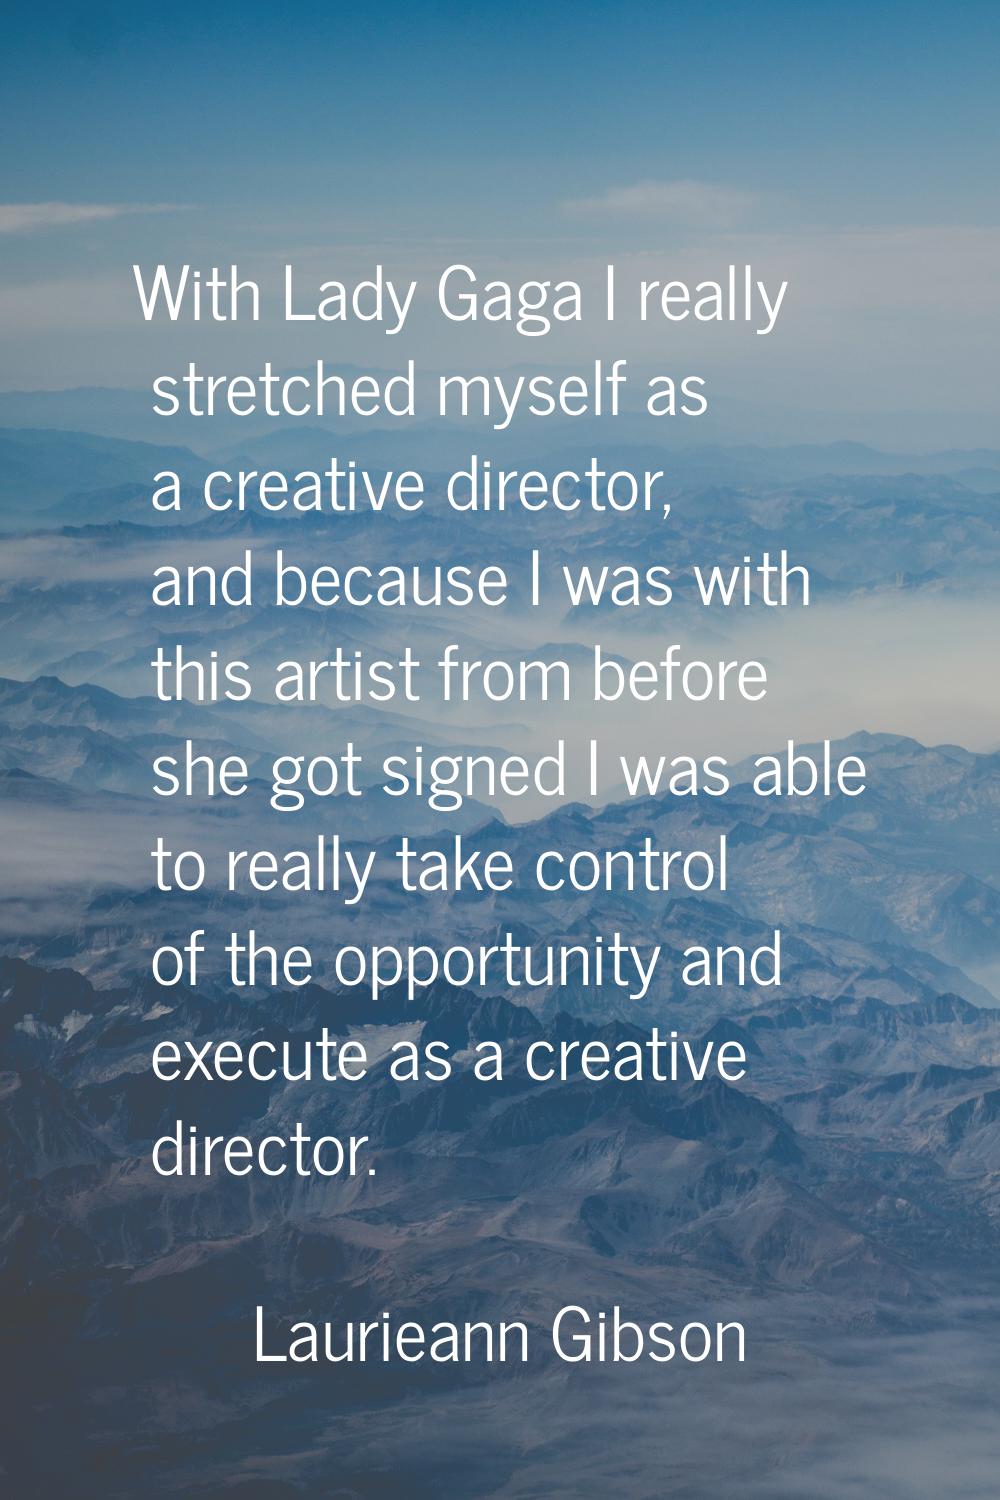 With Lady Gaga I really stretched myself as a creative director, and because I was with this artist